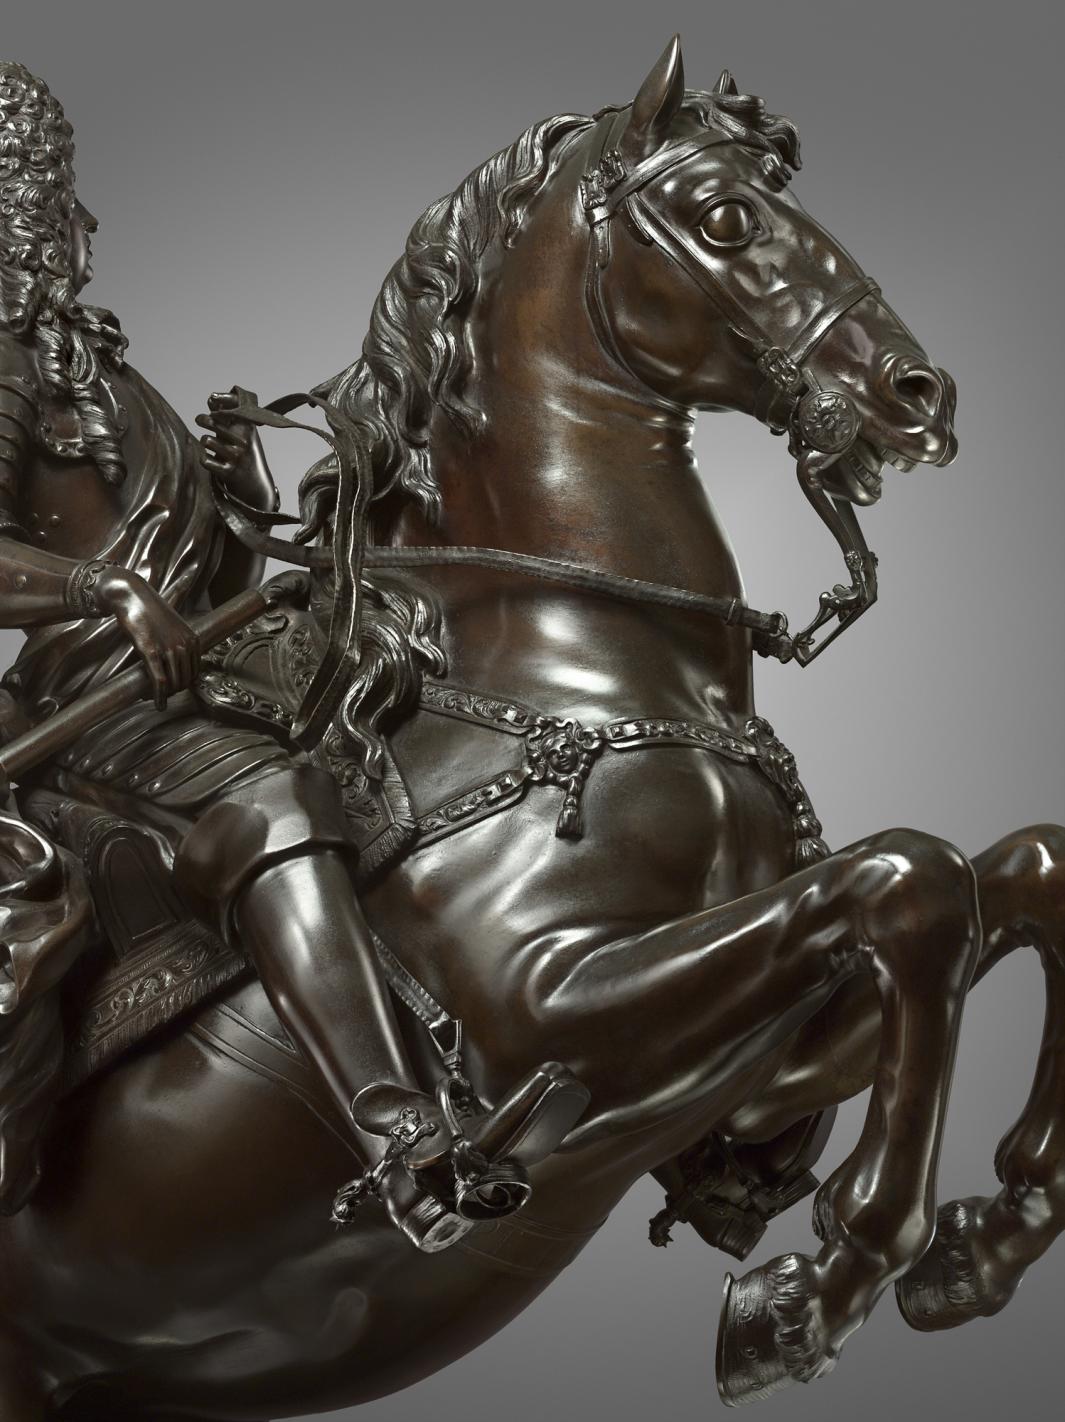 Bronze sculpture of a man on a rearing horse, close up of horse head.